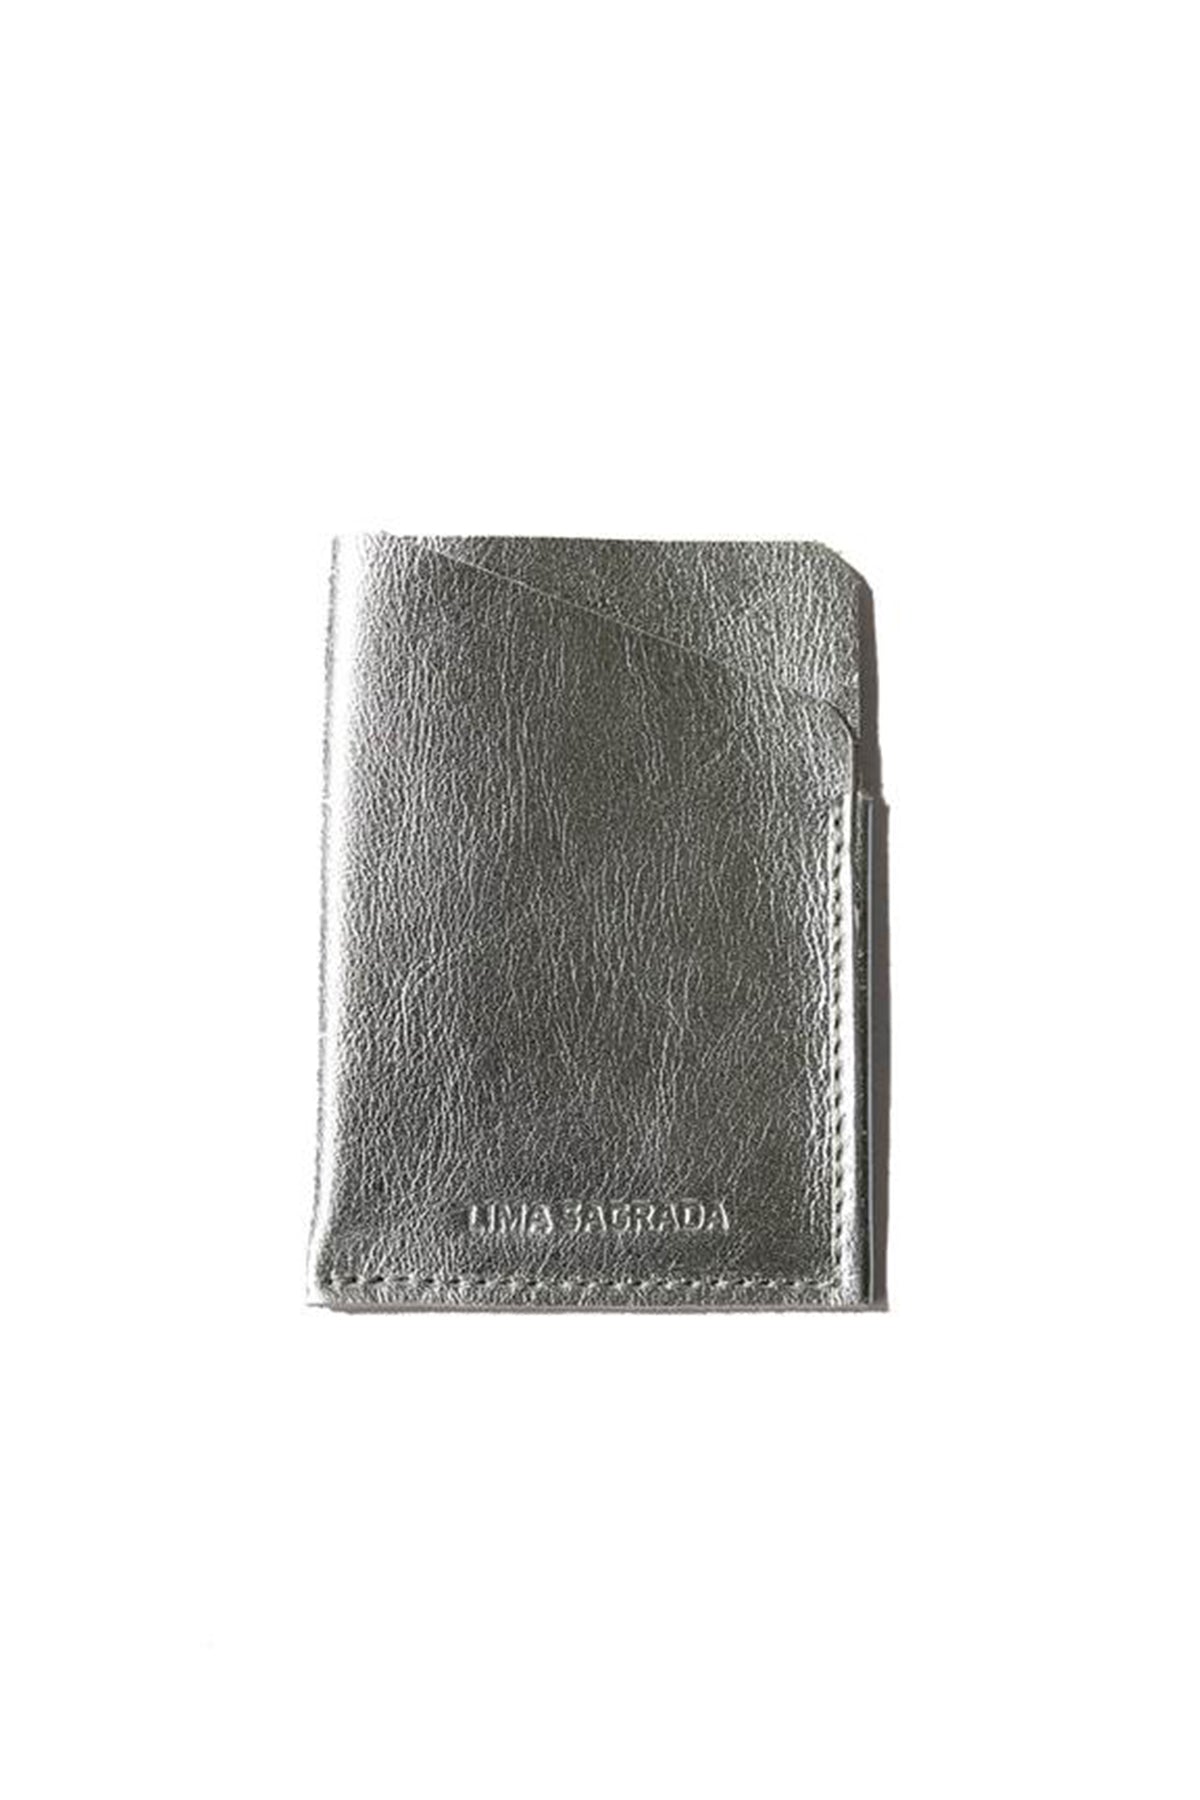   A minimalistic SOFT LEATHER CARD HOLDER BY LIMA SAGRADA, handcrafted by local artisans, showcased on a clean white background. 